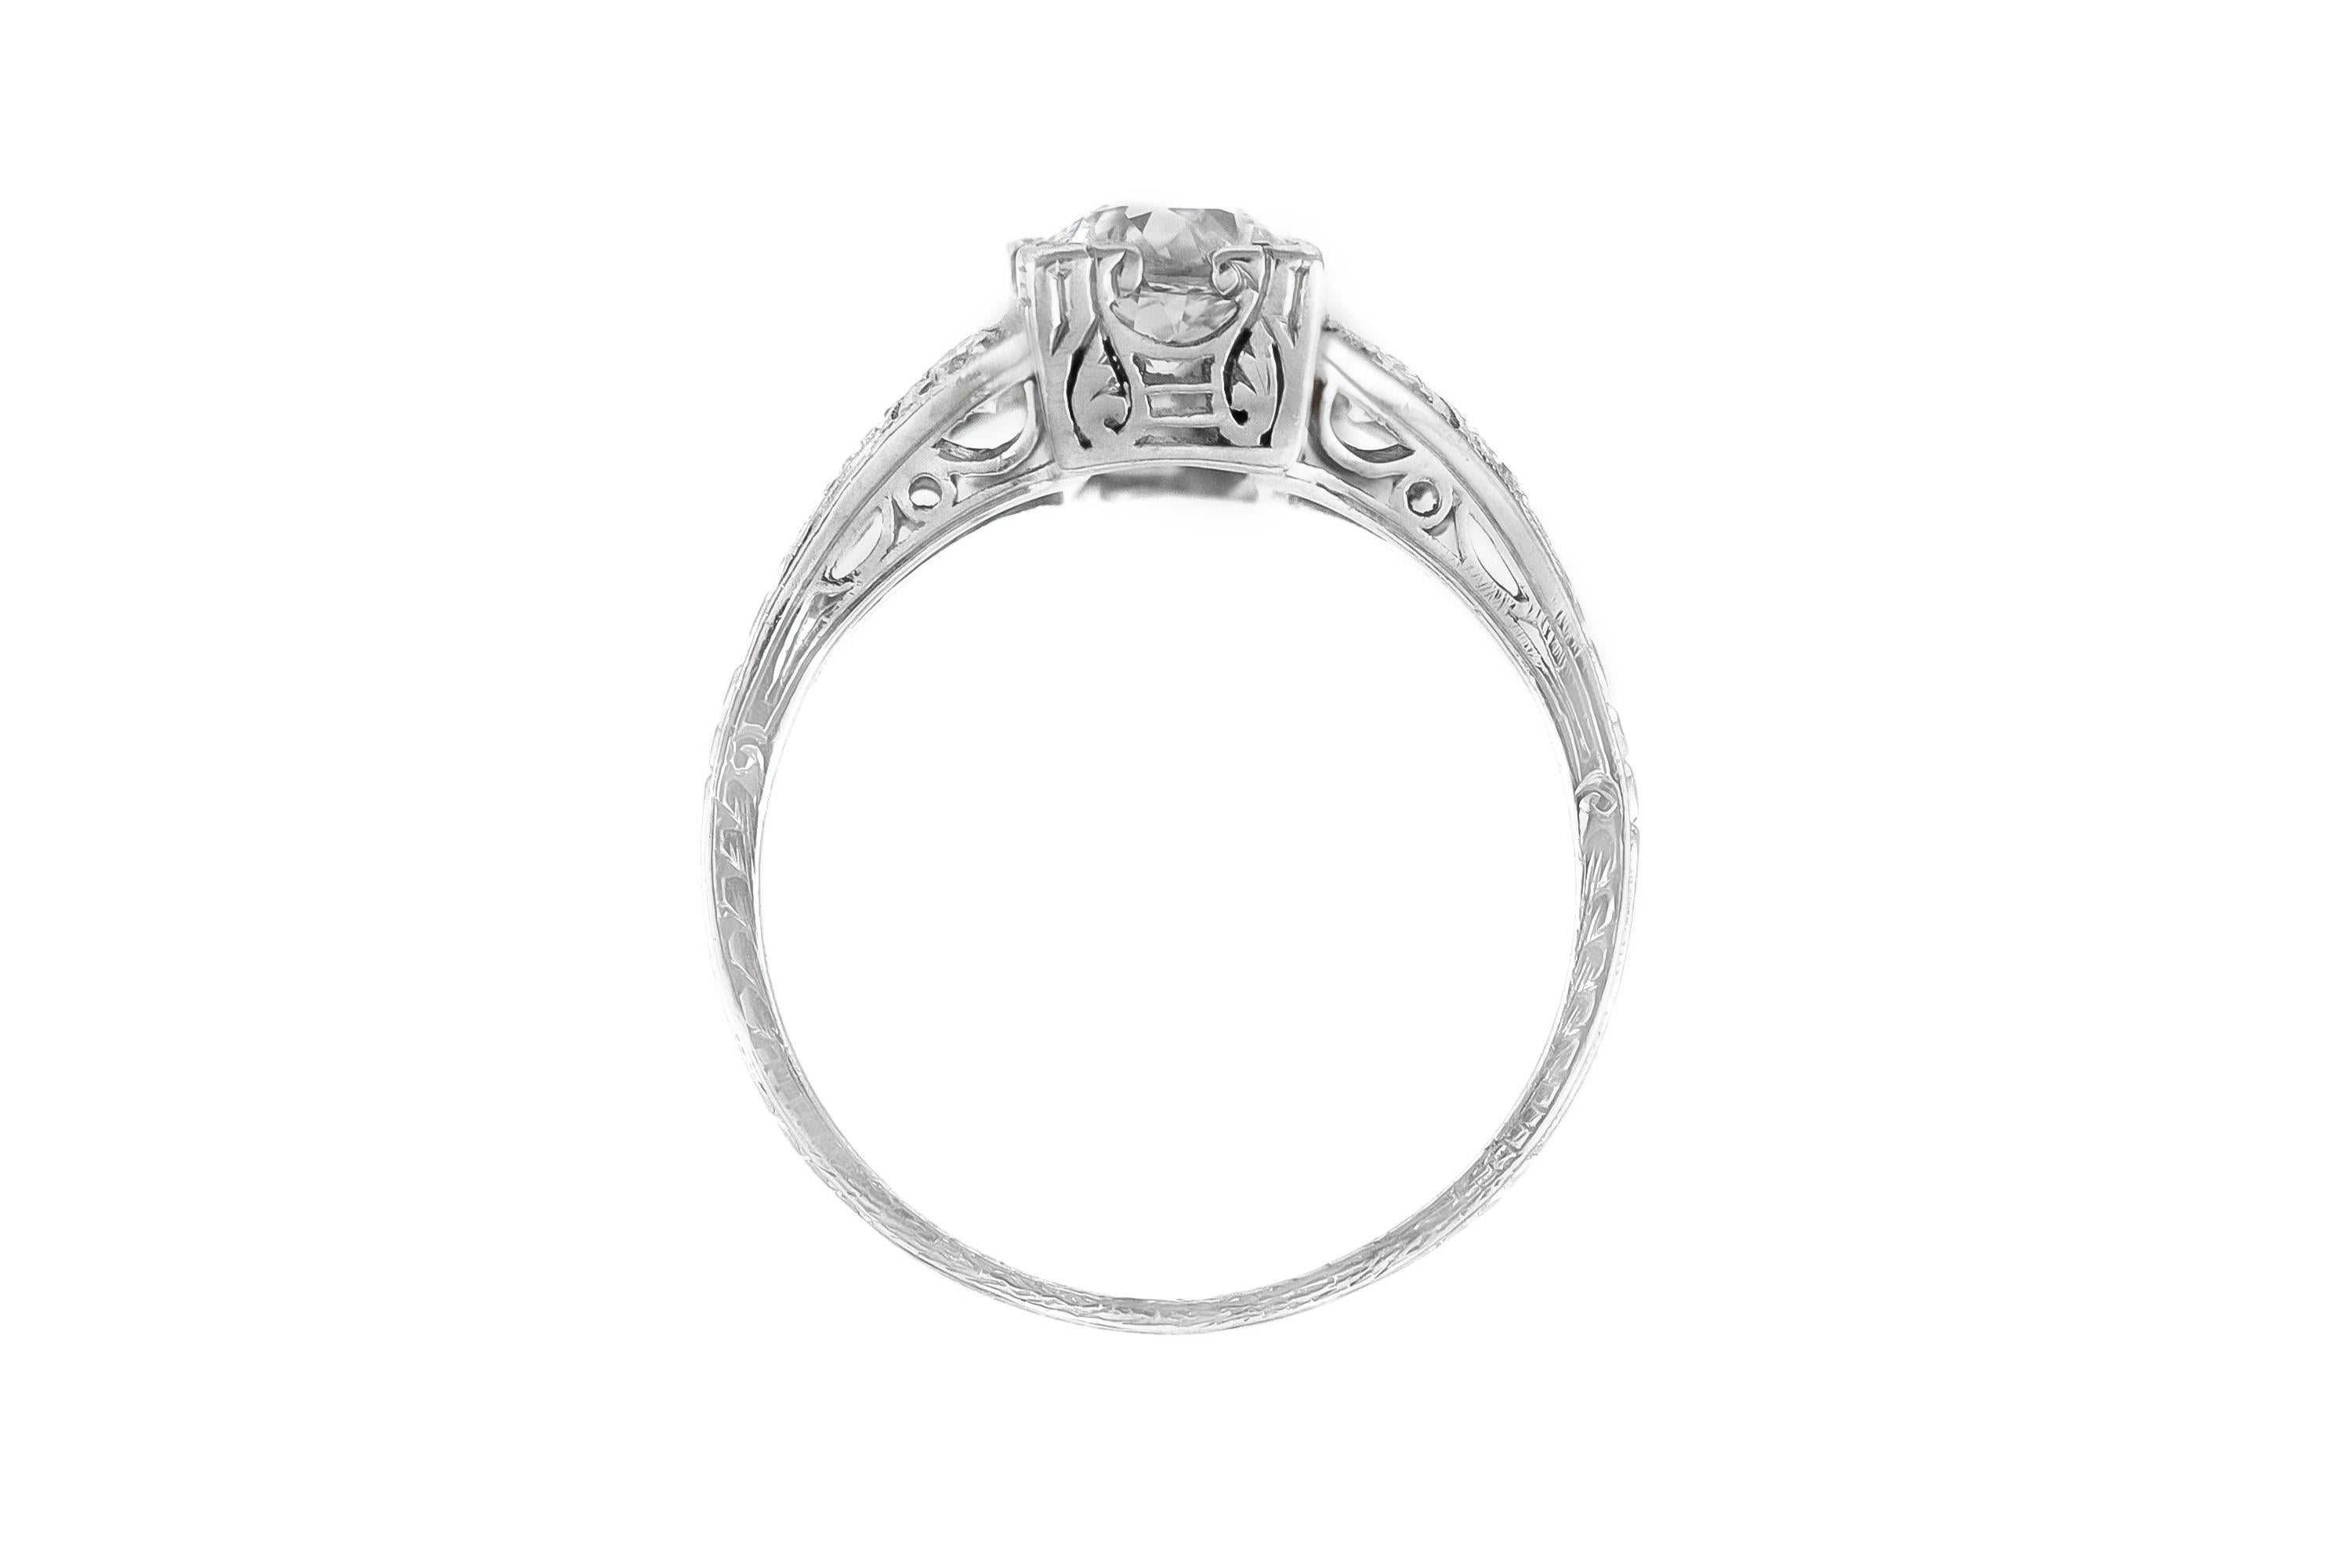 The ring is finely crafted in platinum WITH DIAMONDS WEIGHING APPROXIMATELY TOTAL OF 1.50.
Approximately Color I   Clarity VS
Size 5.00 (easy to resize)
Circa 1930.